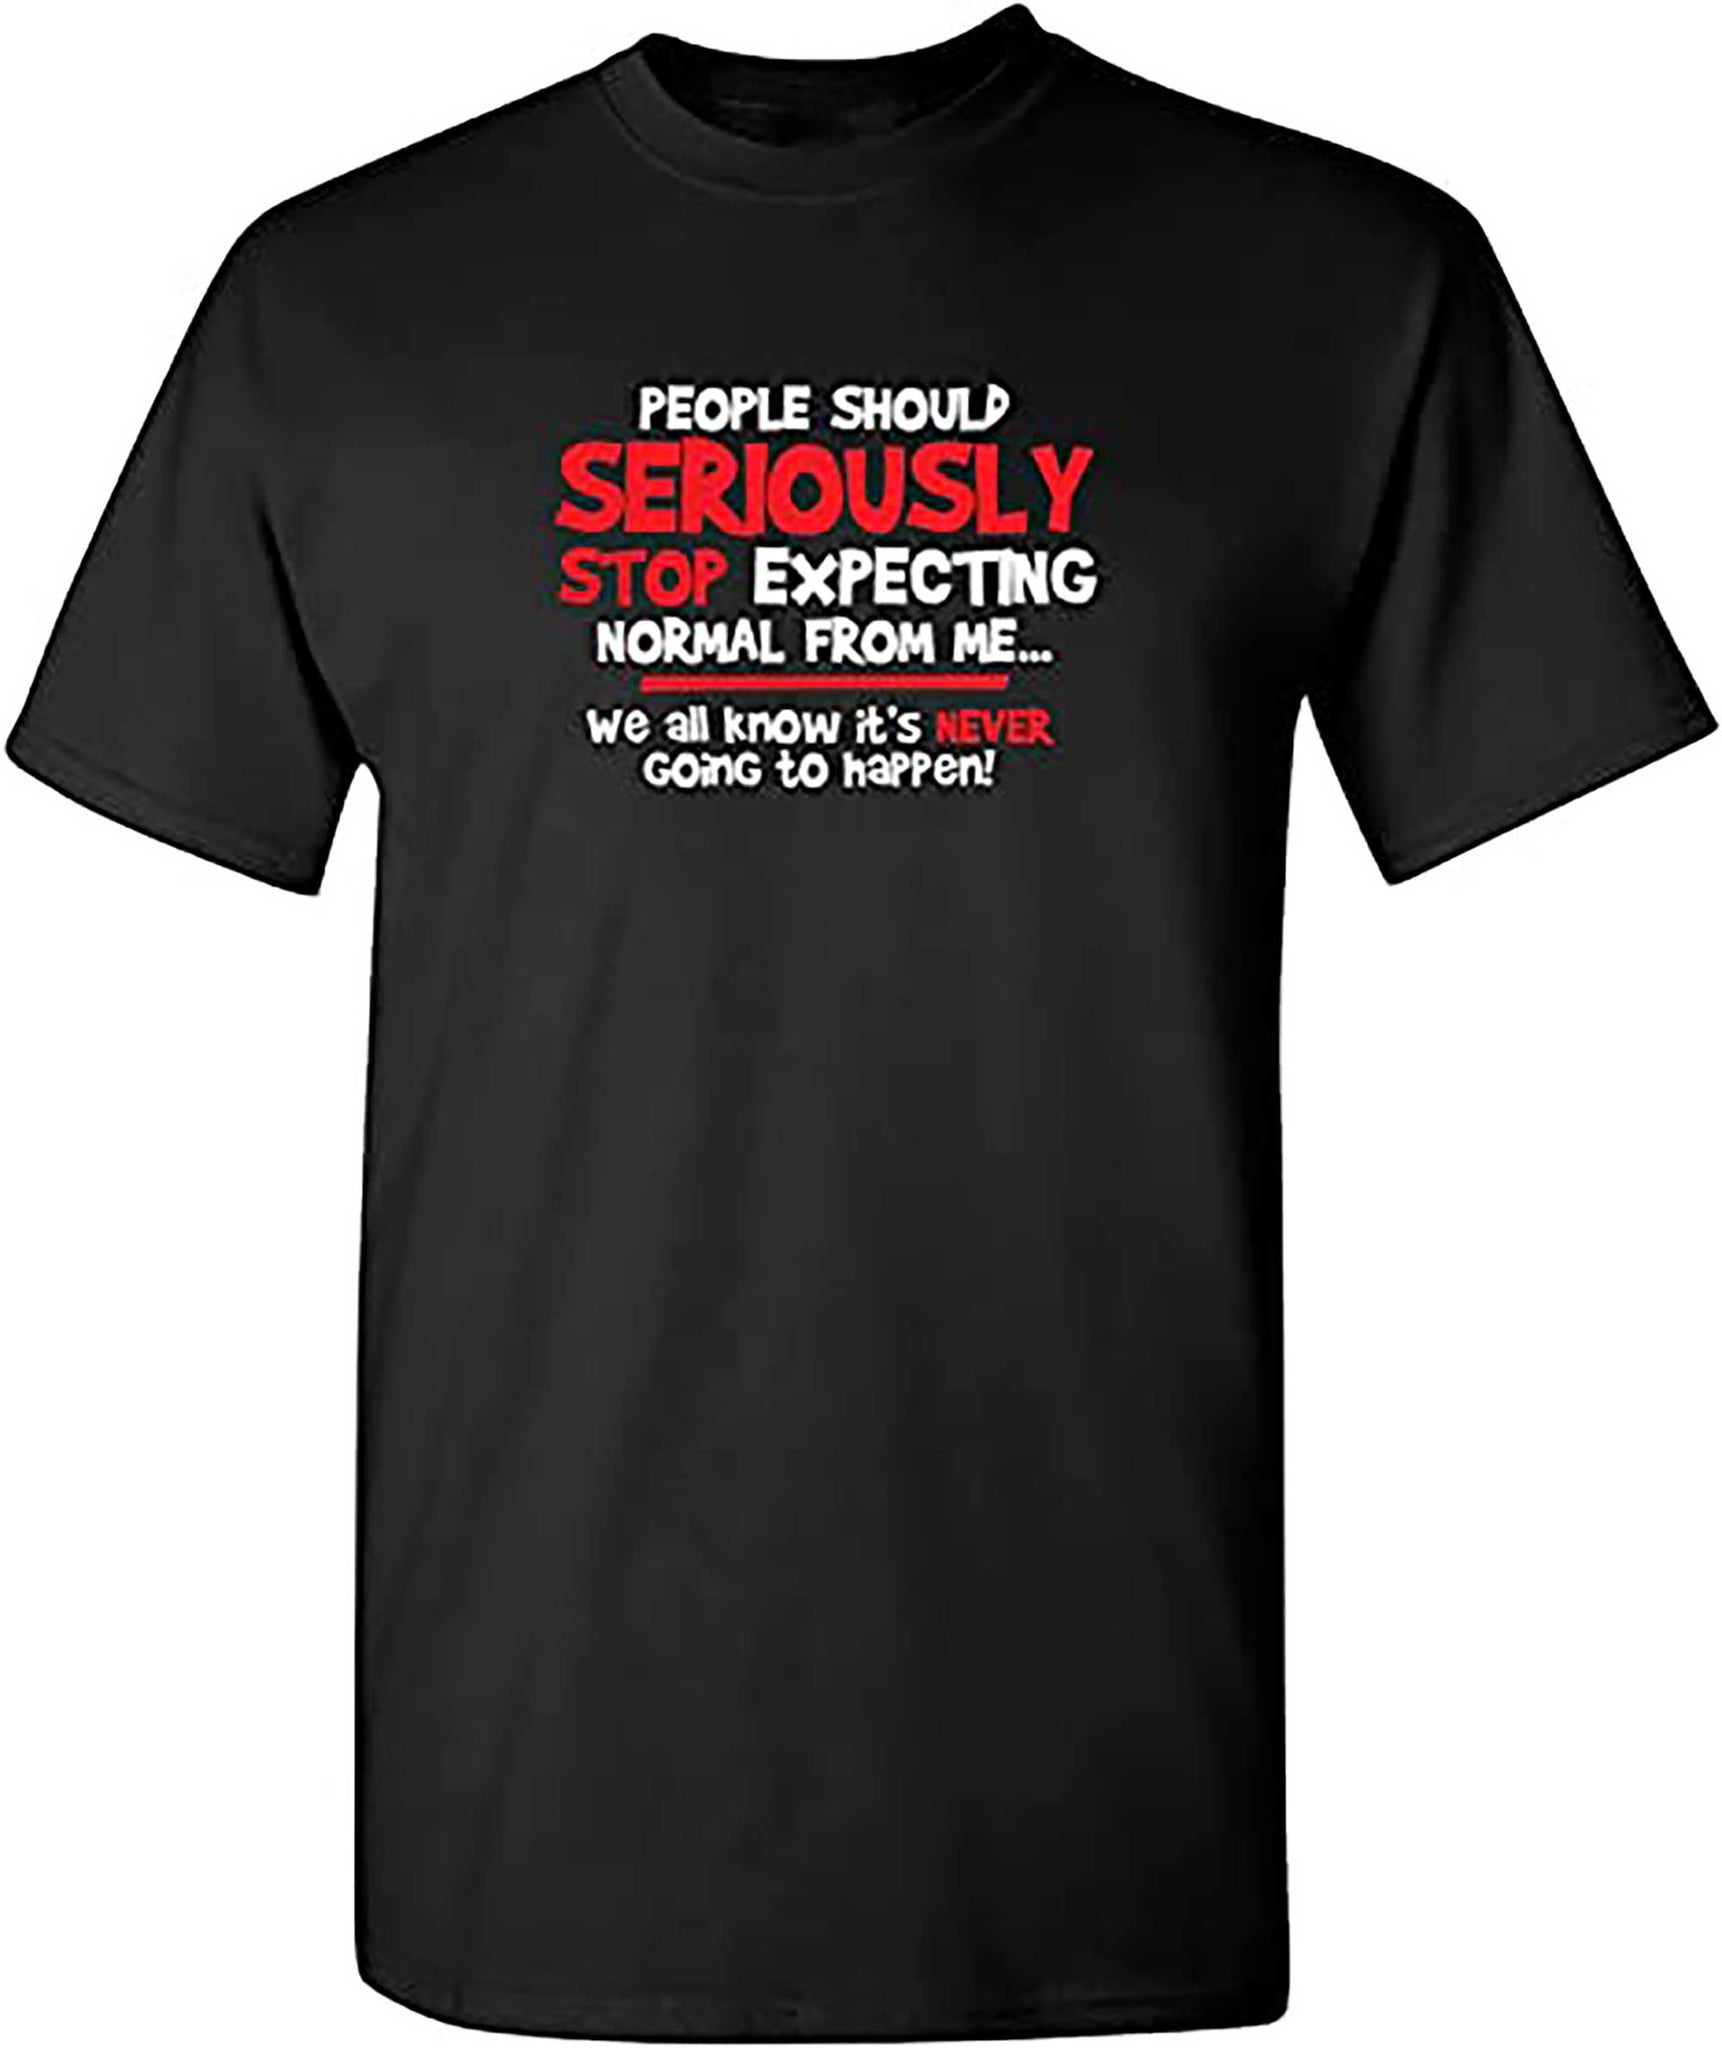 Skitongifts People Should Seriously Graphic Gift Idea Humor Novelty Sarcastic Funny T Shirt